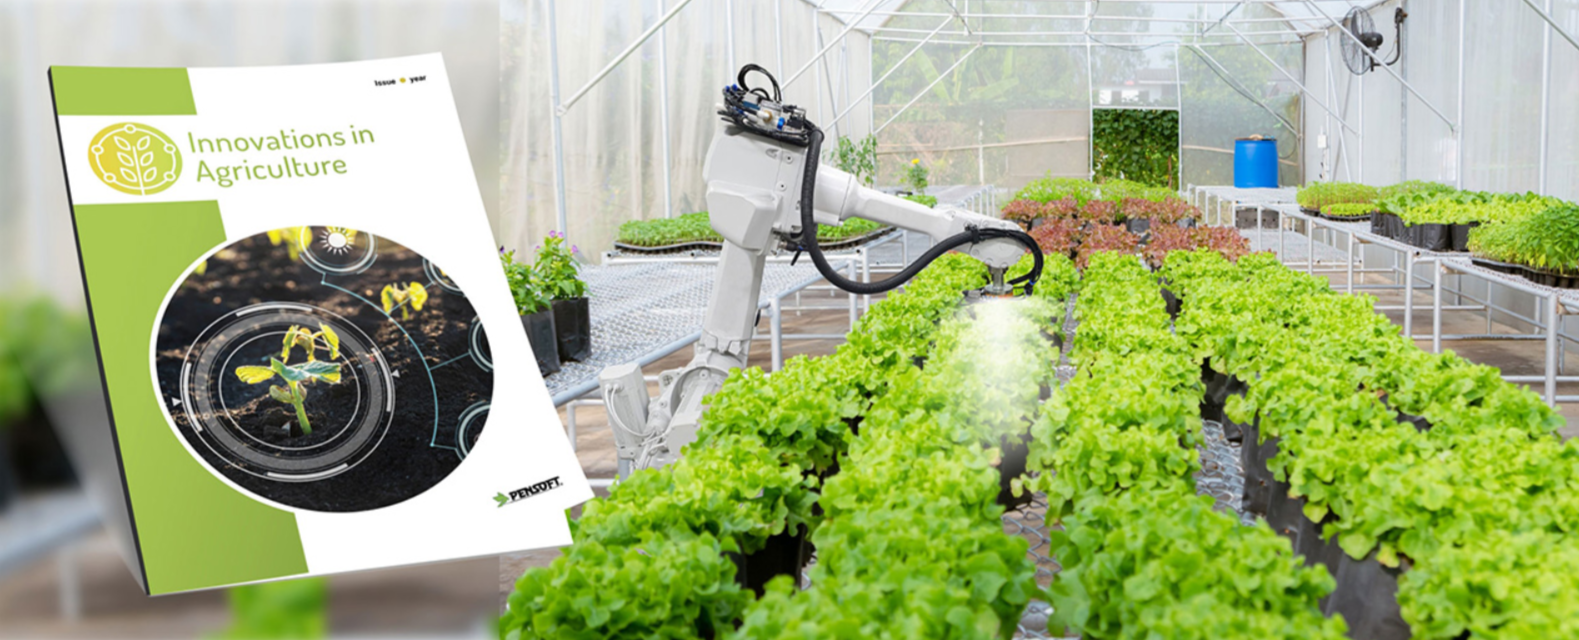 A green scientific journal next to crops being watered by a robotic arm.